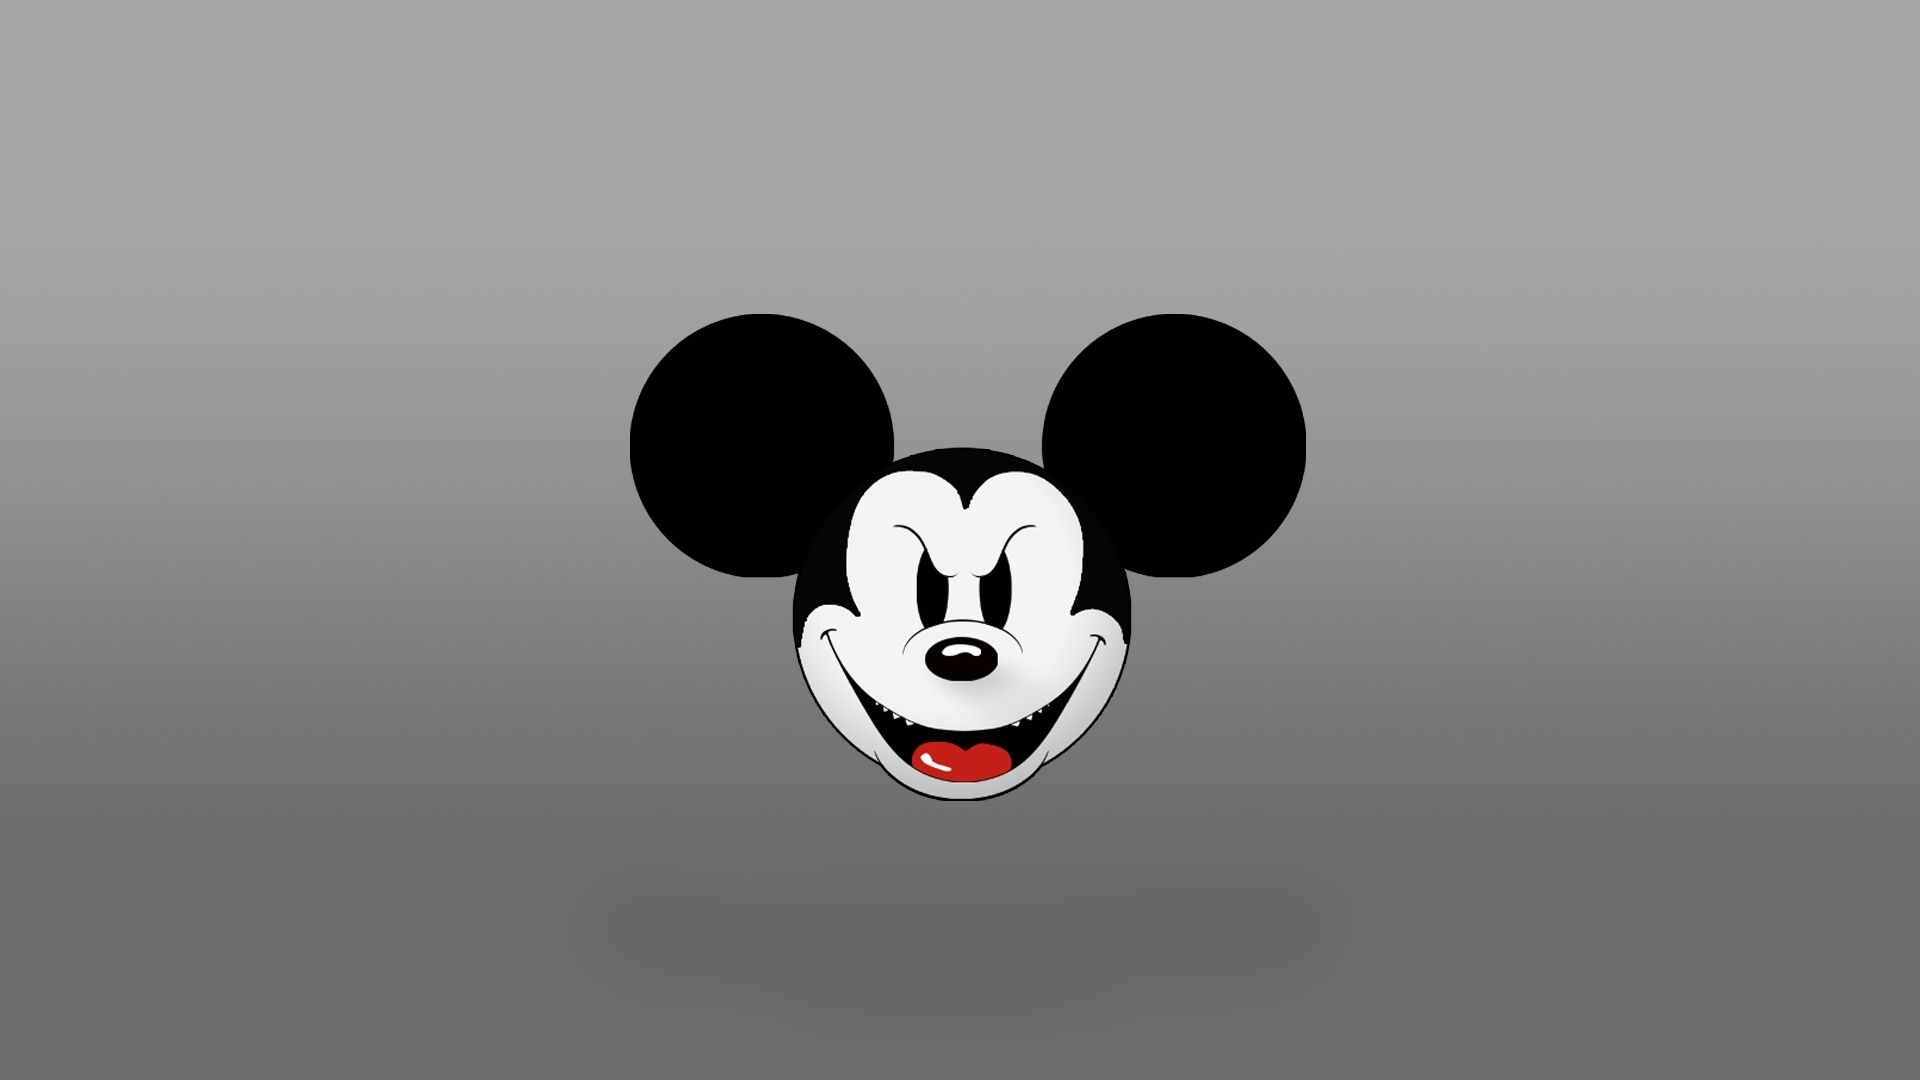 Full HD 1080p Mickey mouse Wallpapers HD, Desktop Backgrounds